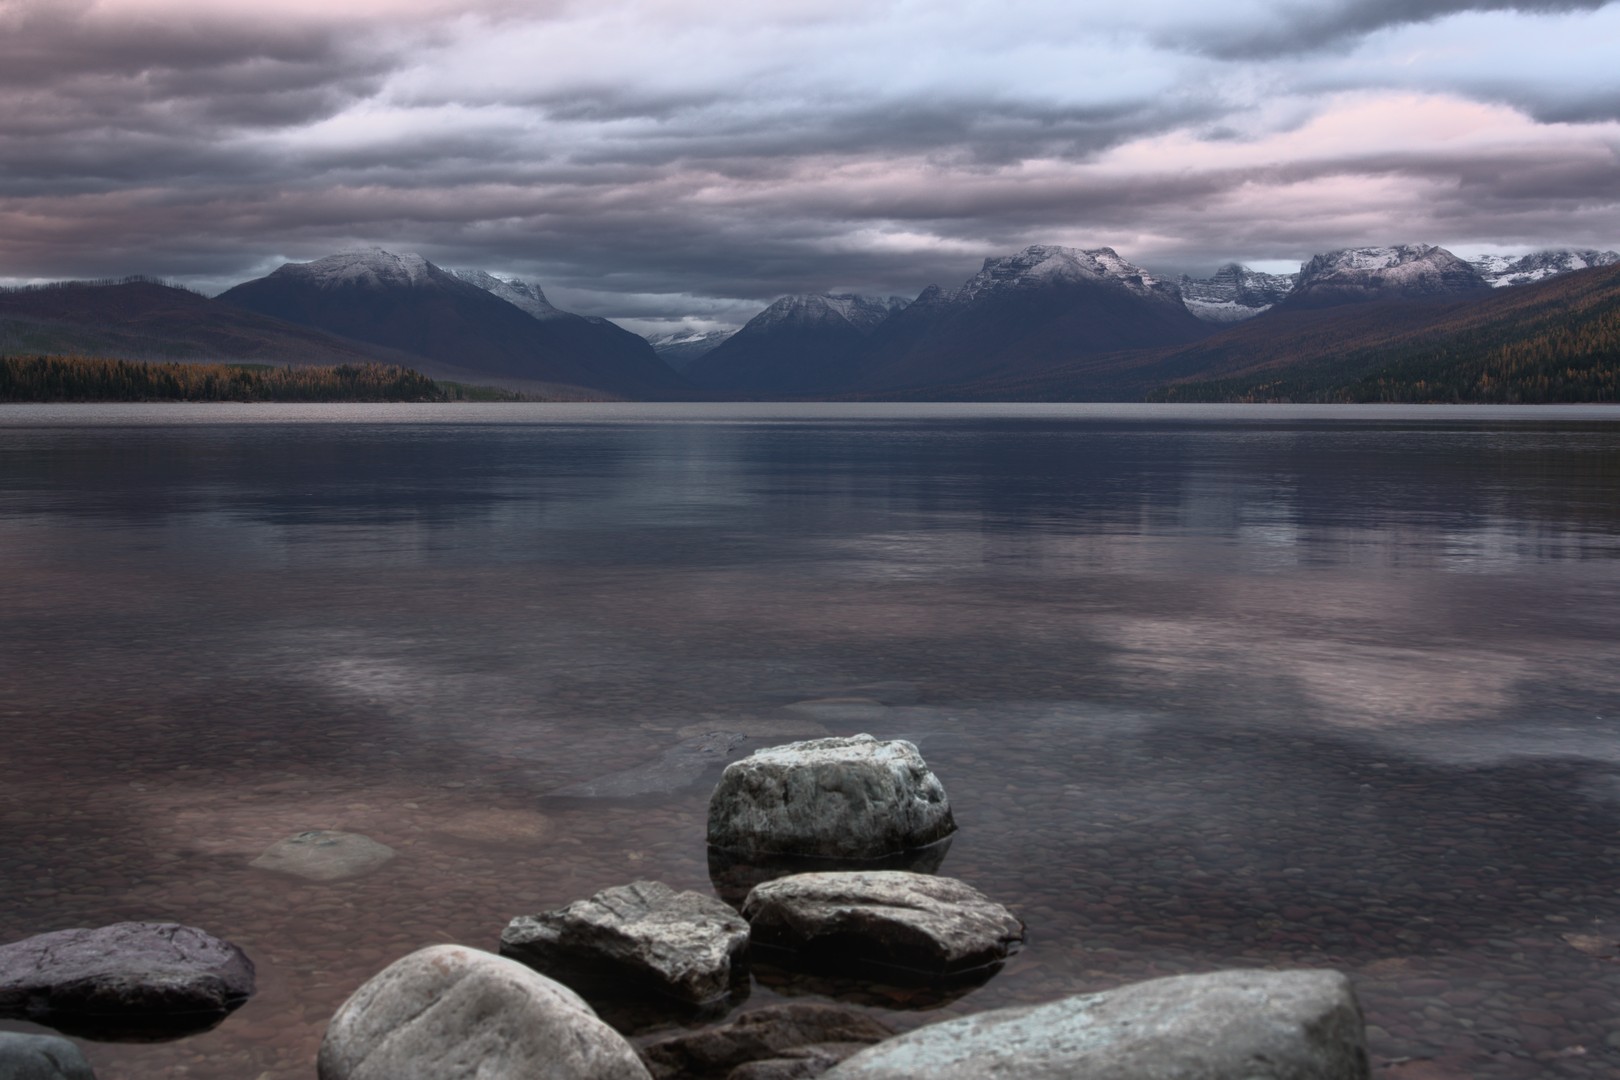 A serene still lake photo with glacial rocks in the foreground and mountains with snowy peaks in the background with sunset hue cloud cover.